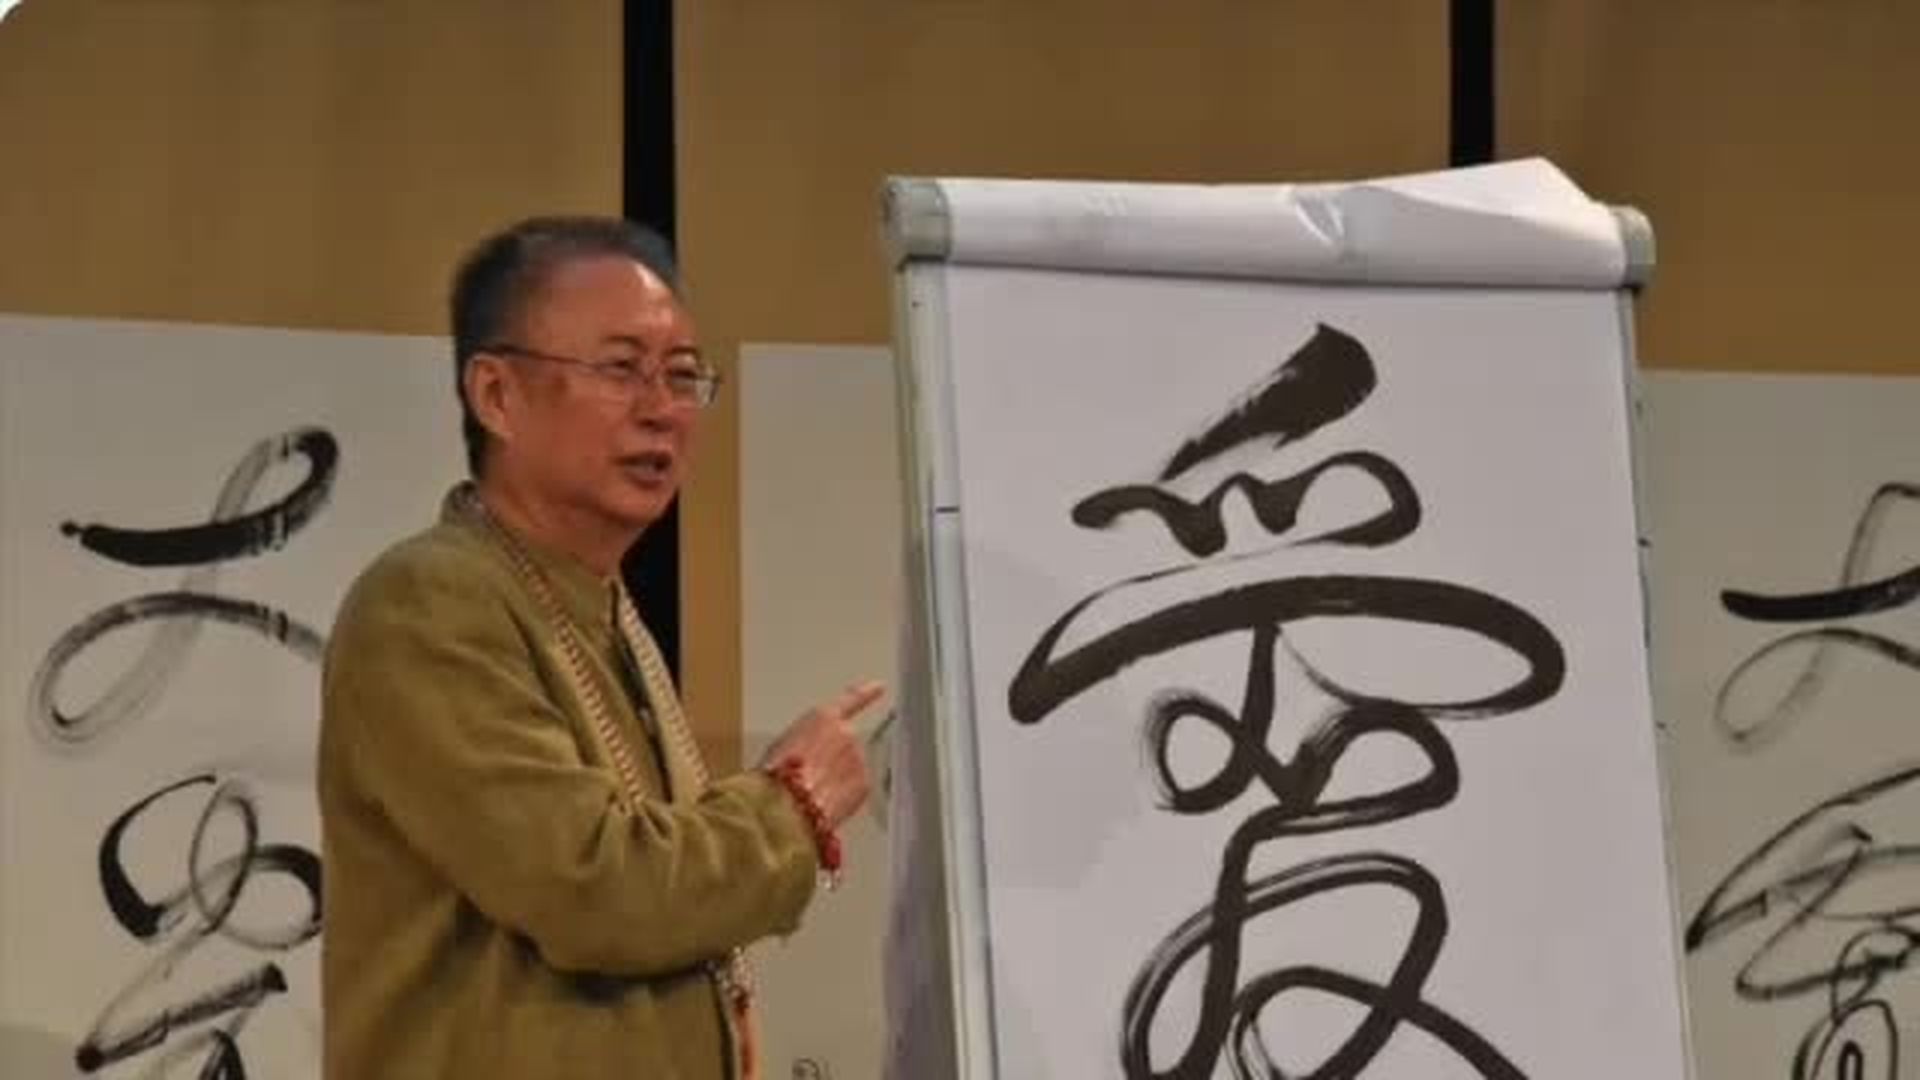 Tao Calligraphy To Heal with Dr. Zhi Gang Sha on Nancy Yearout's High Road to Humanity